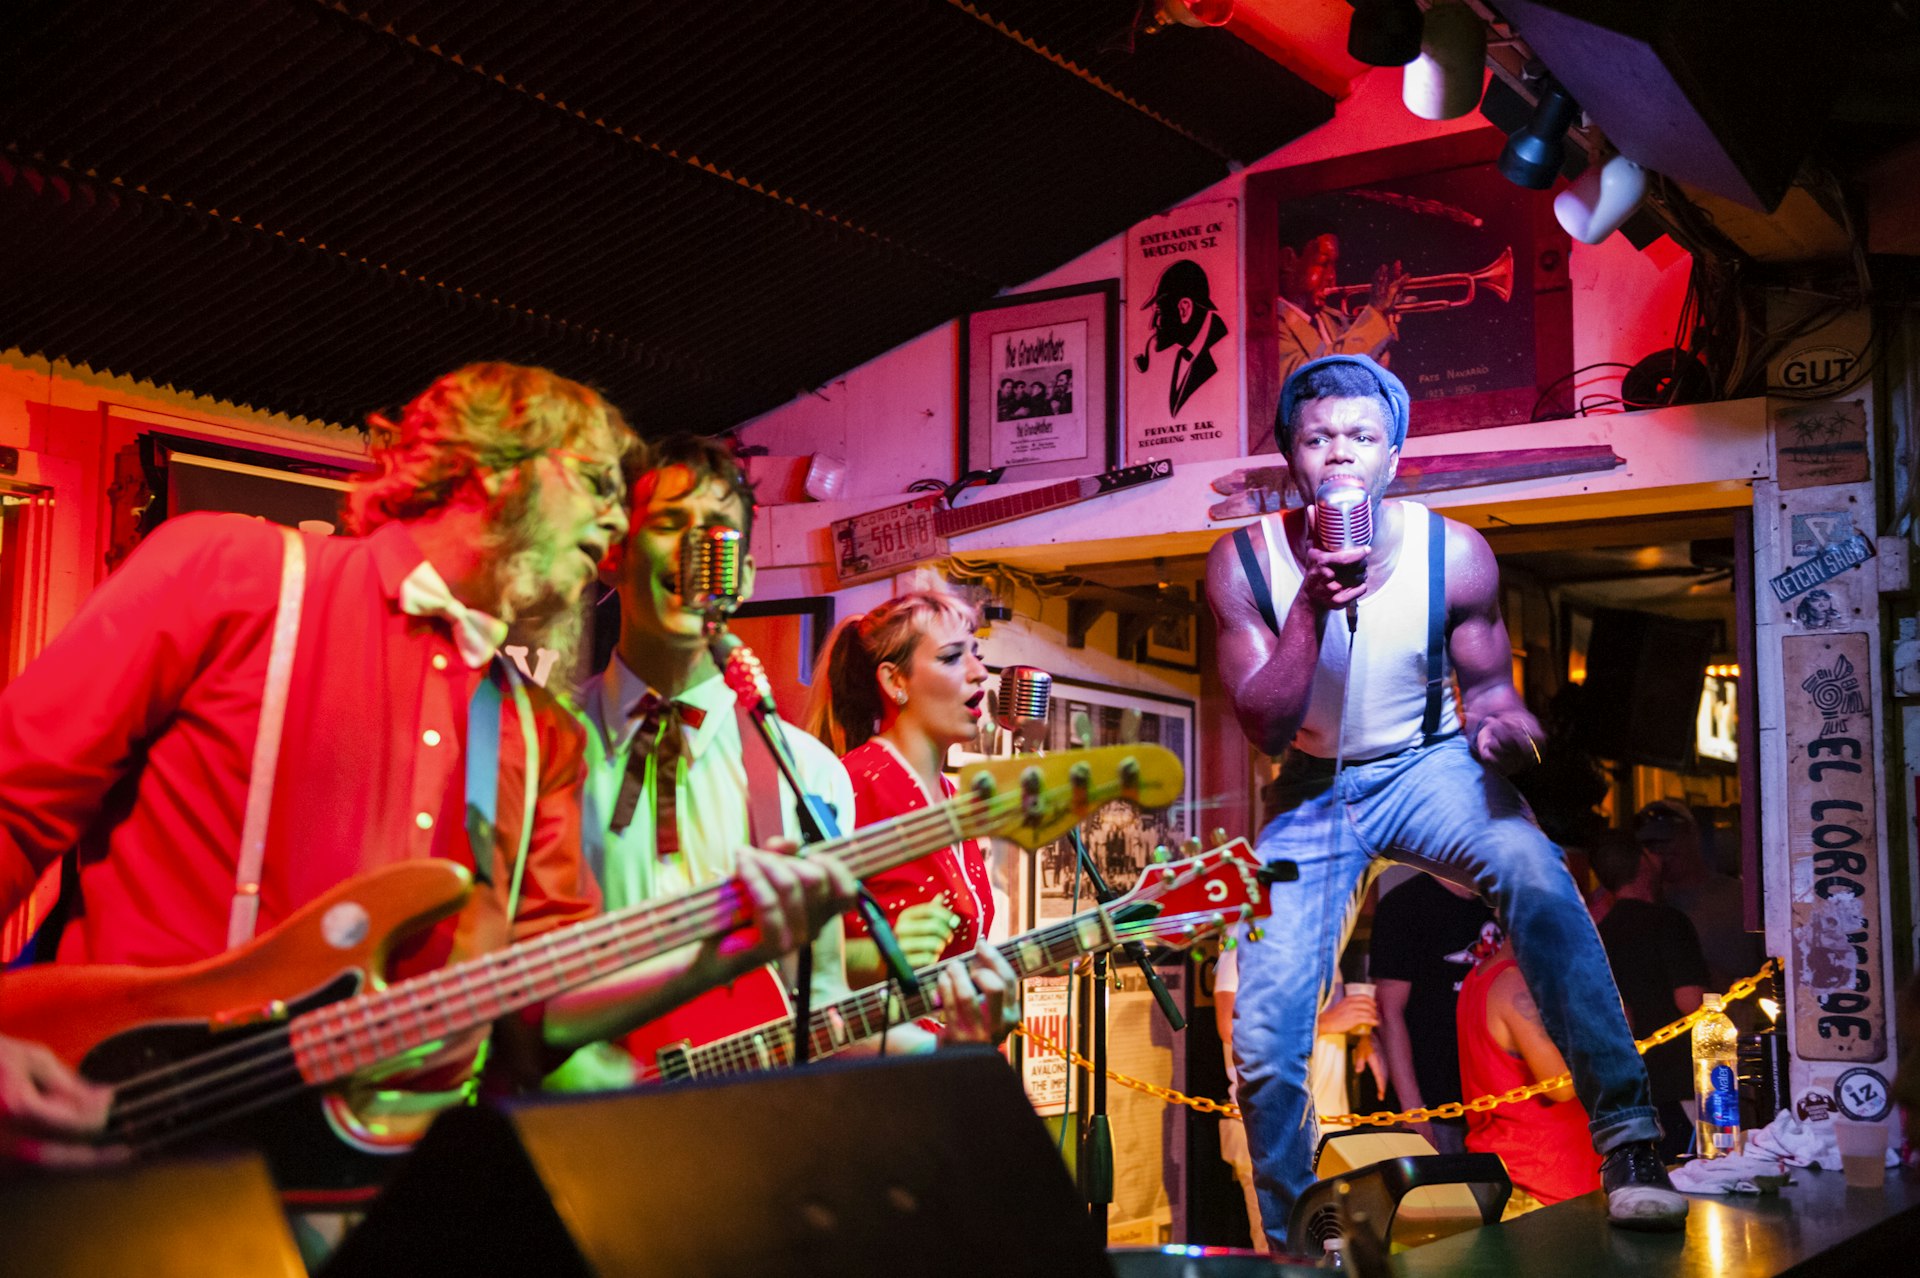 A band performing in rockabilly outfits at the Green Parrot bar in Key West, Florida